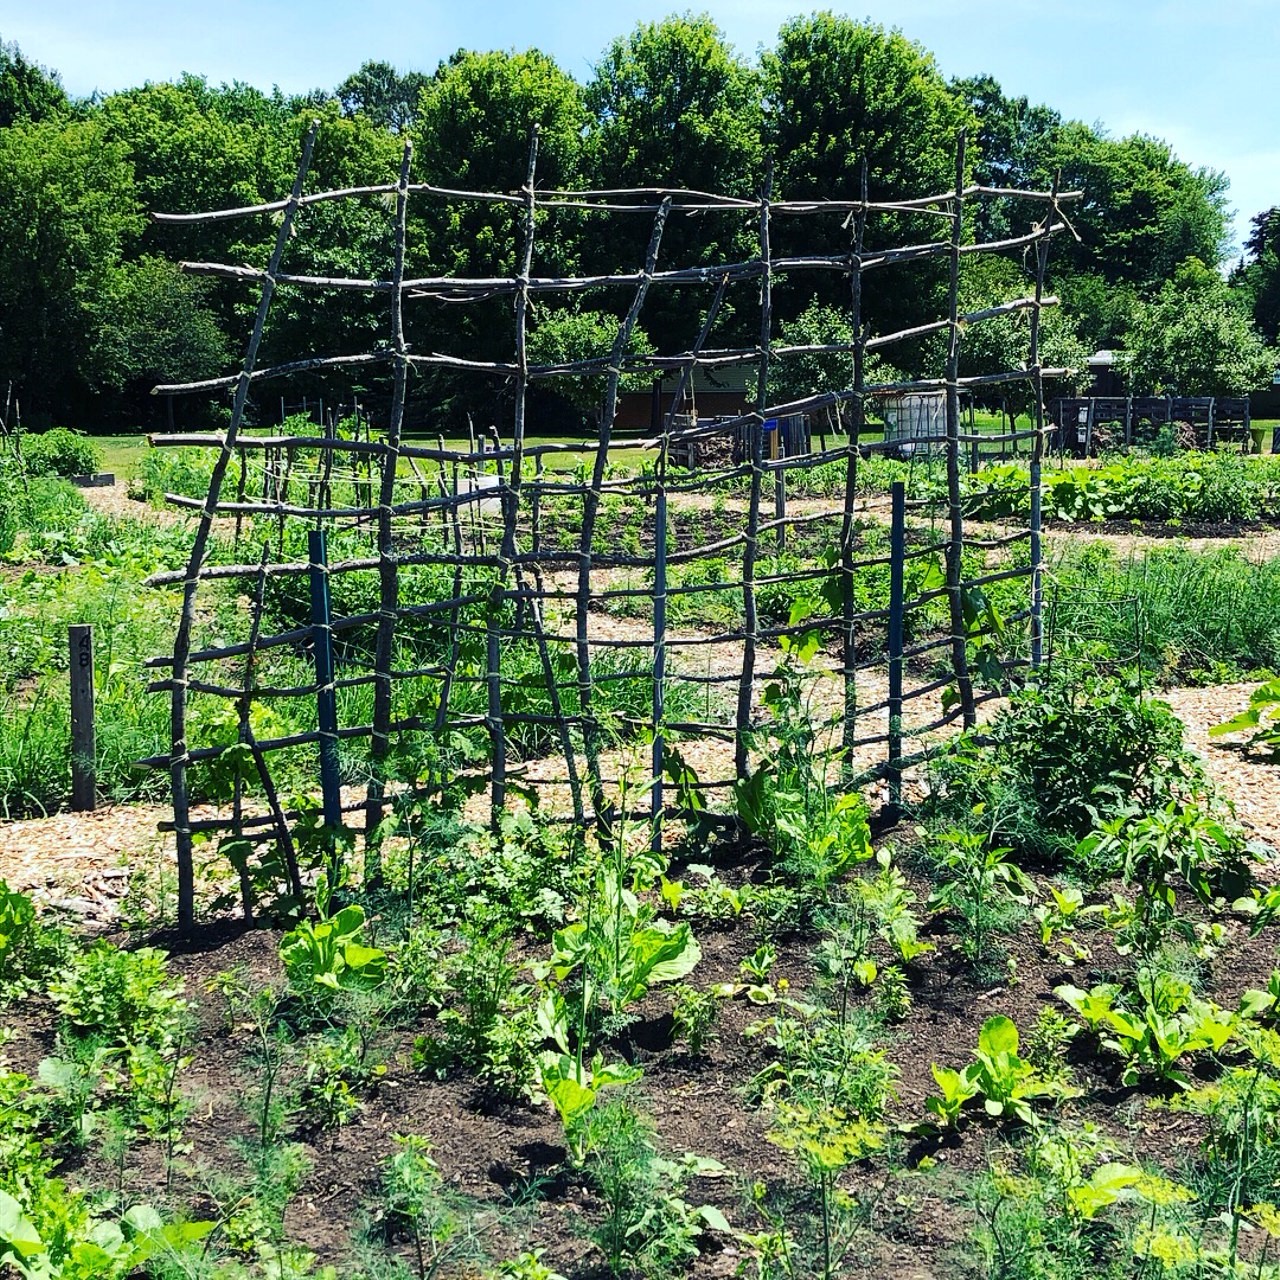 Community garden with vegetables and a fence made of small branches.